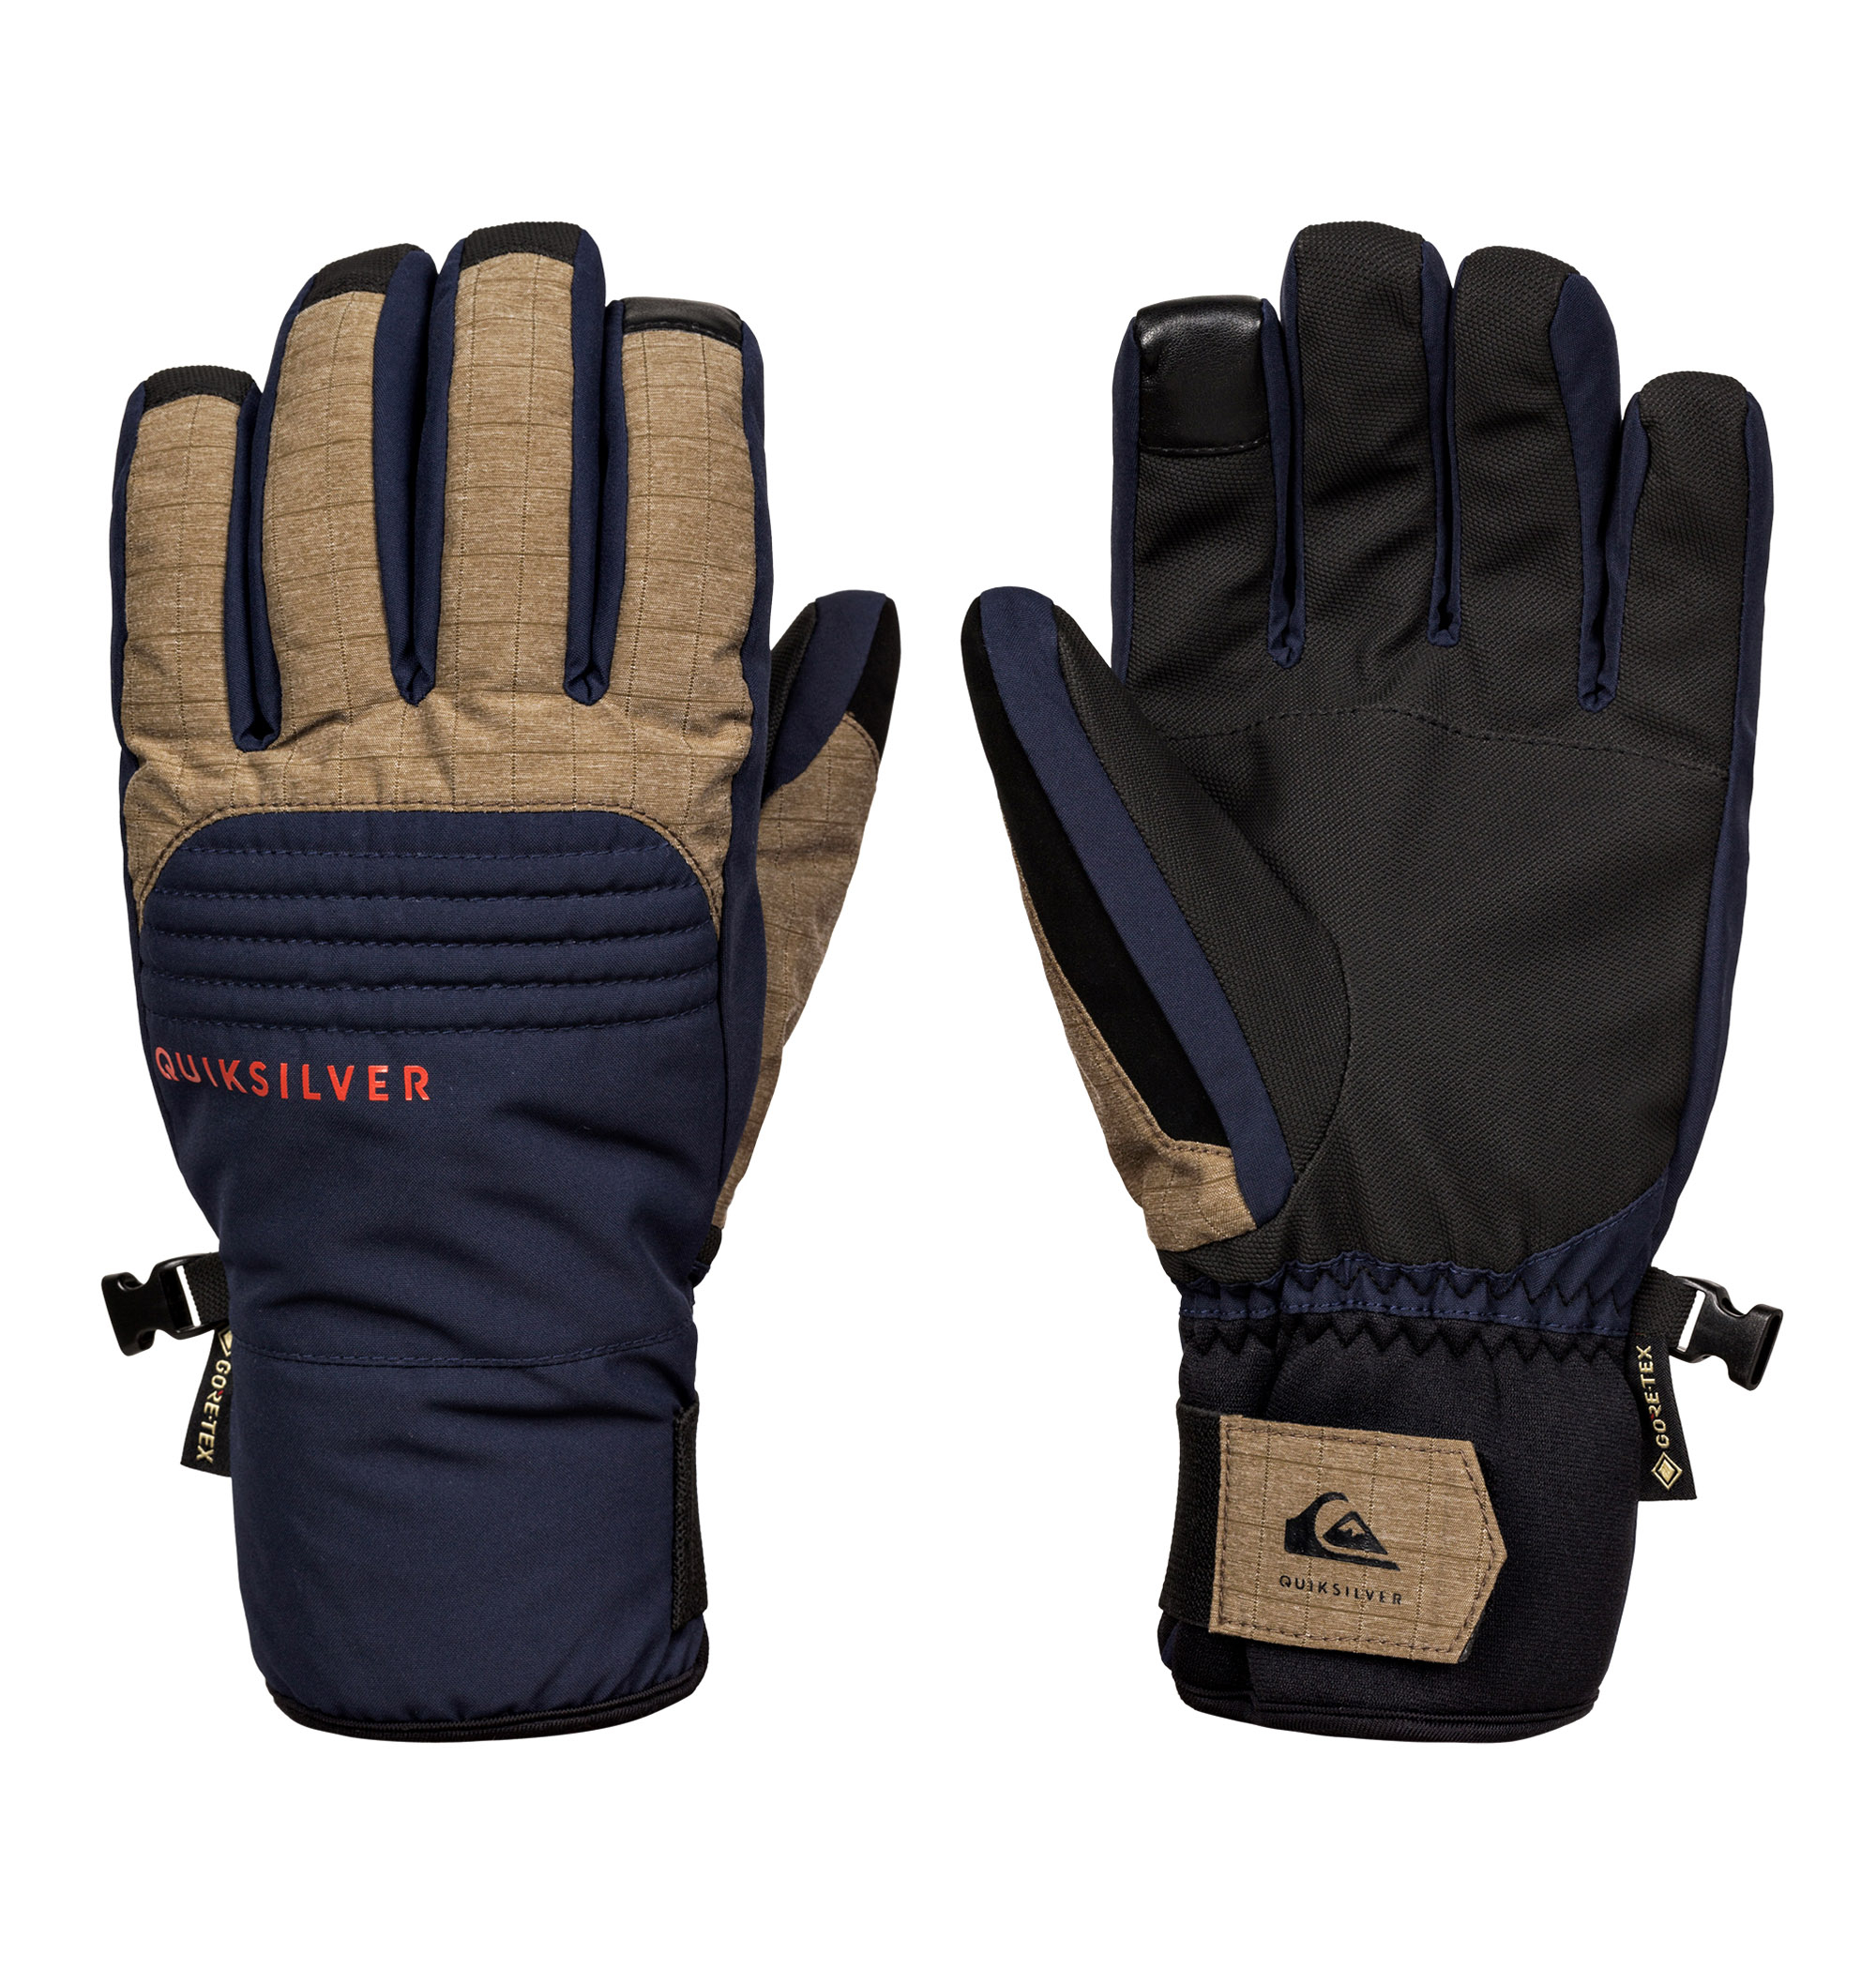 35%OFF！＜Quiksilver＞ HILL GORE-TEX GLOVE【送料無料】 配色切り替え×ステッチデザインが魅力のグローブ